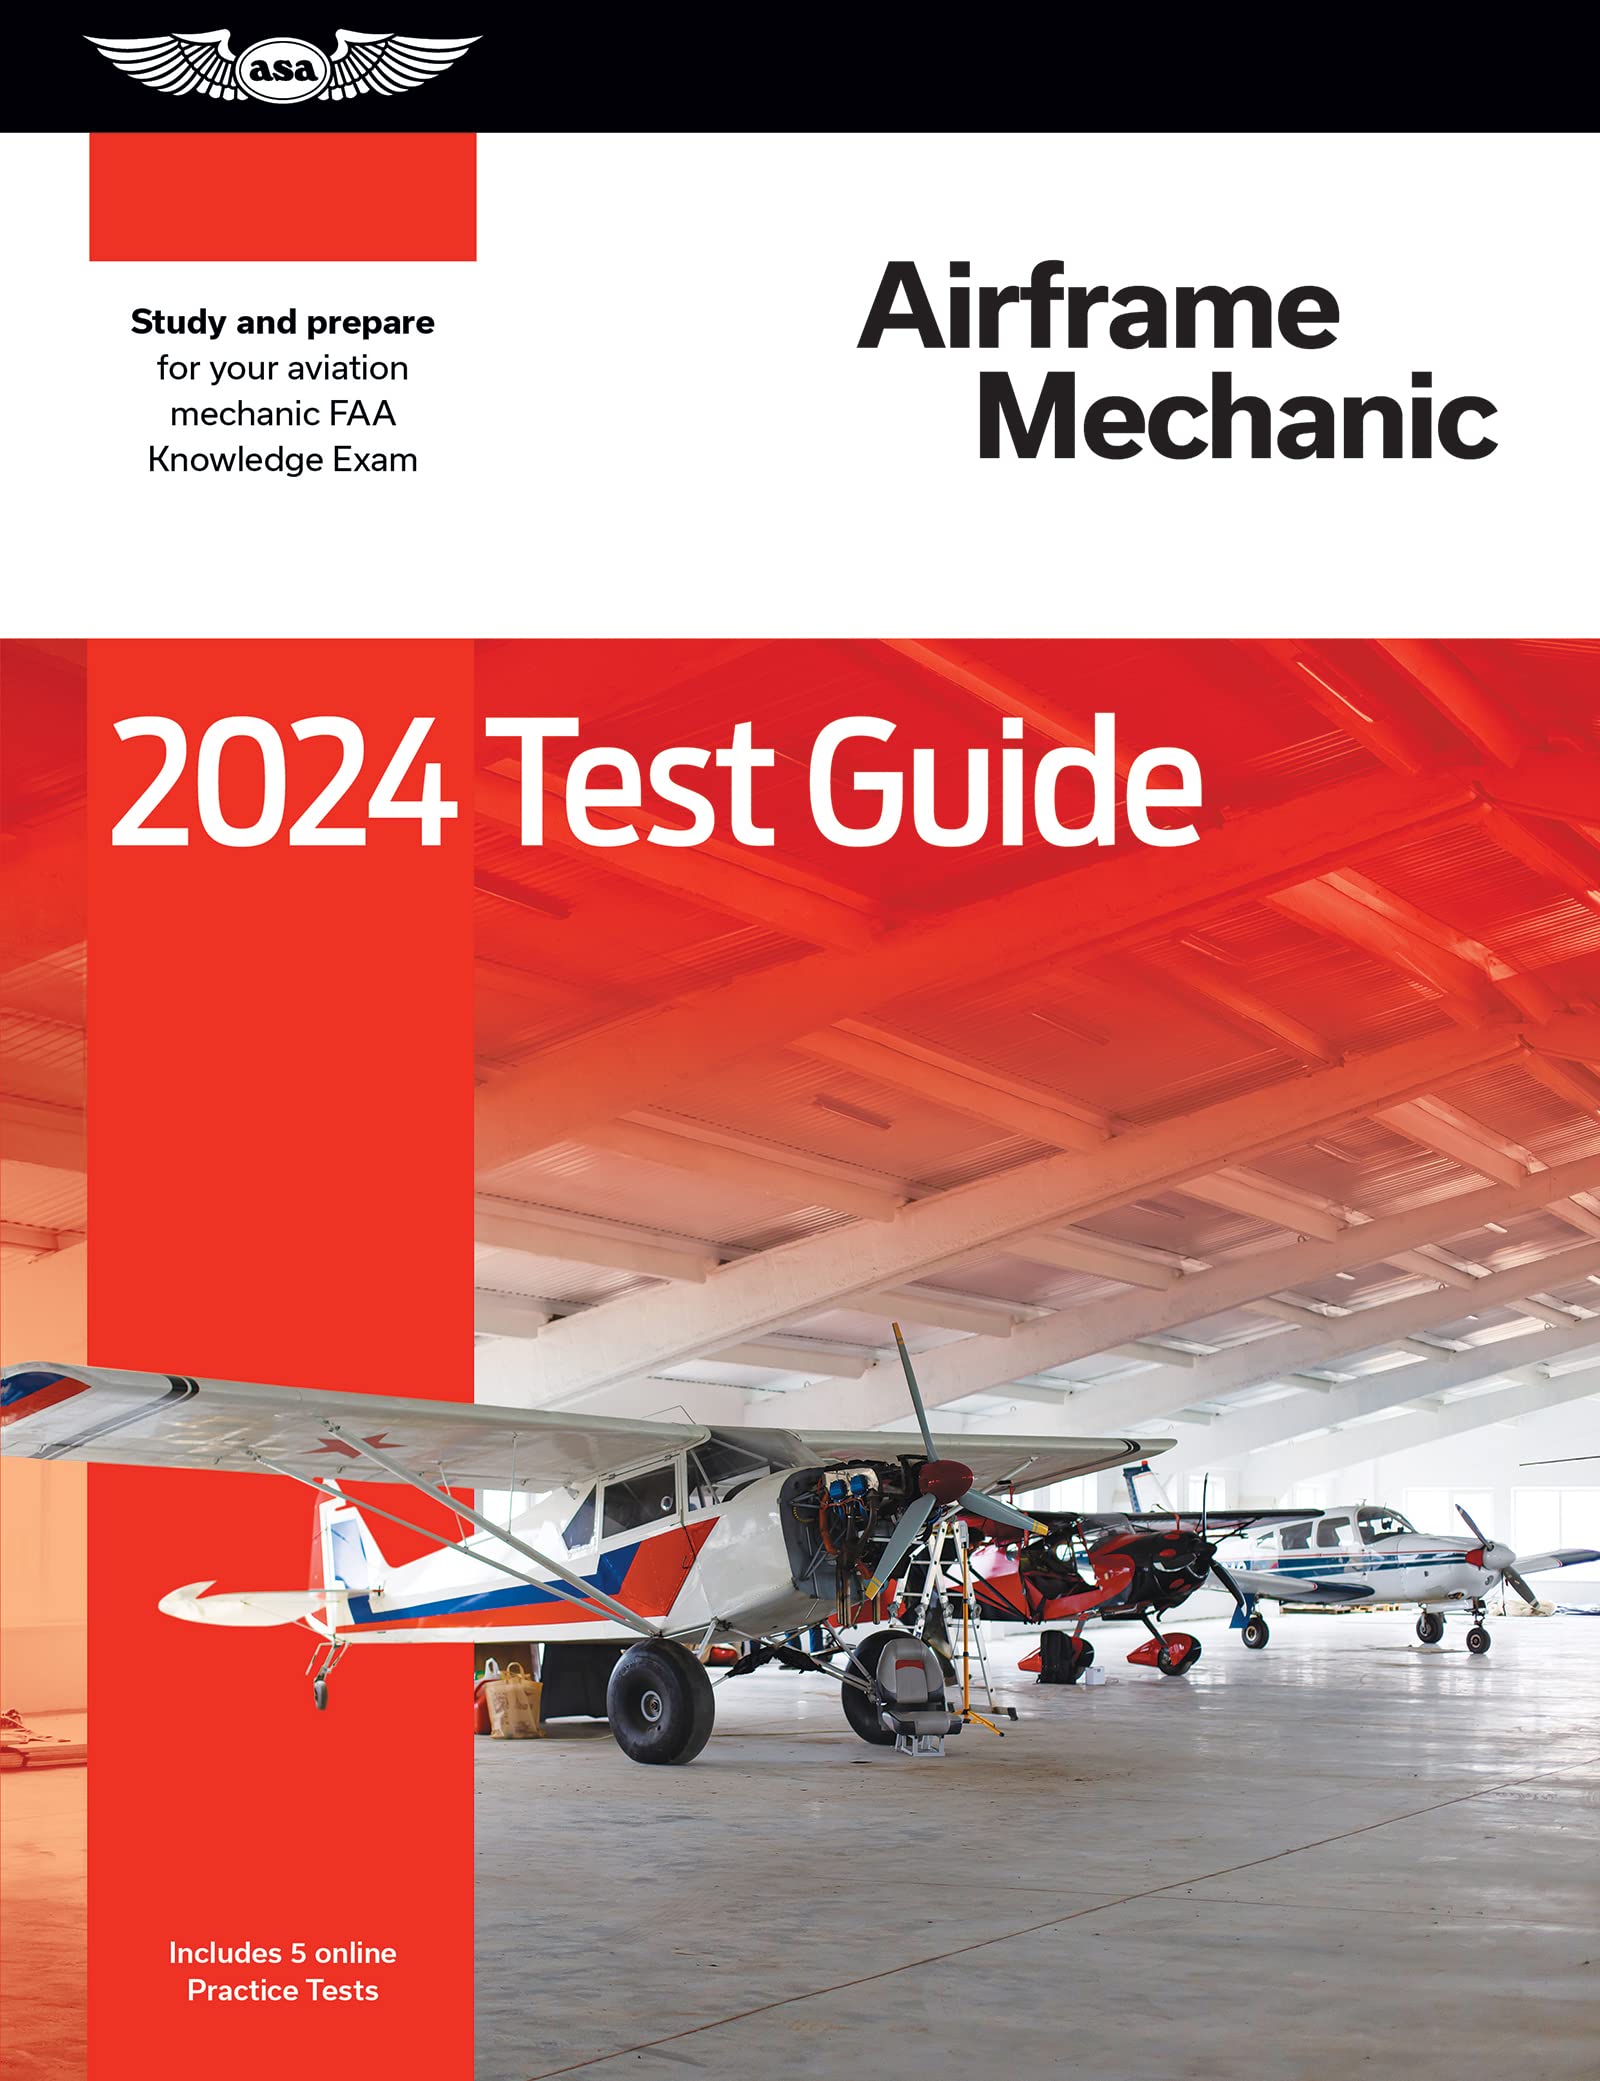 2024 Airframe Mechanic Test Guide: Study and prepare for your aviation mechanic FAA Knowledge Exam (ASA Test Prep Series)